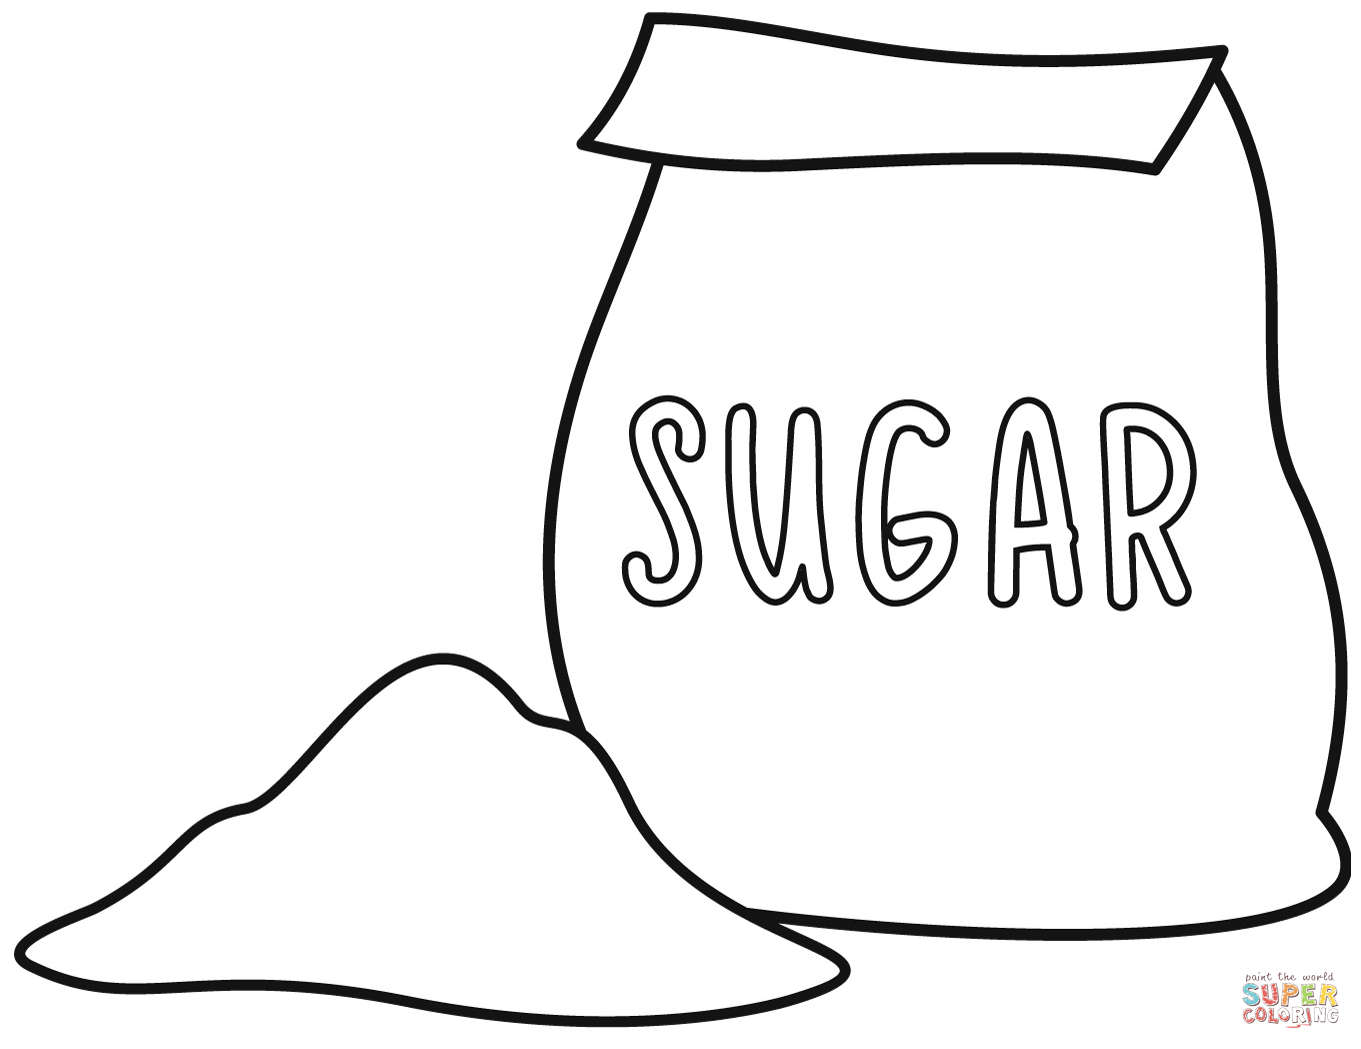 Sugar coloring page | Free Printable Coloring Pages